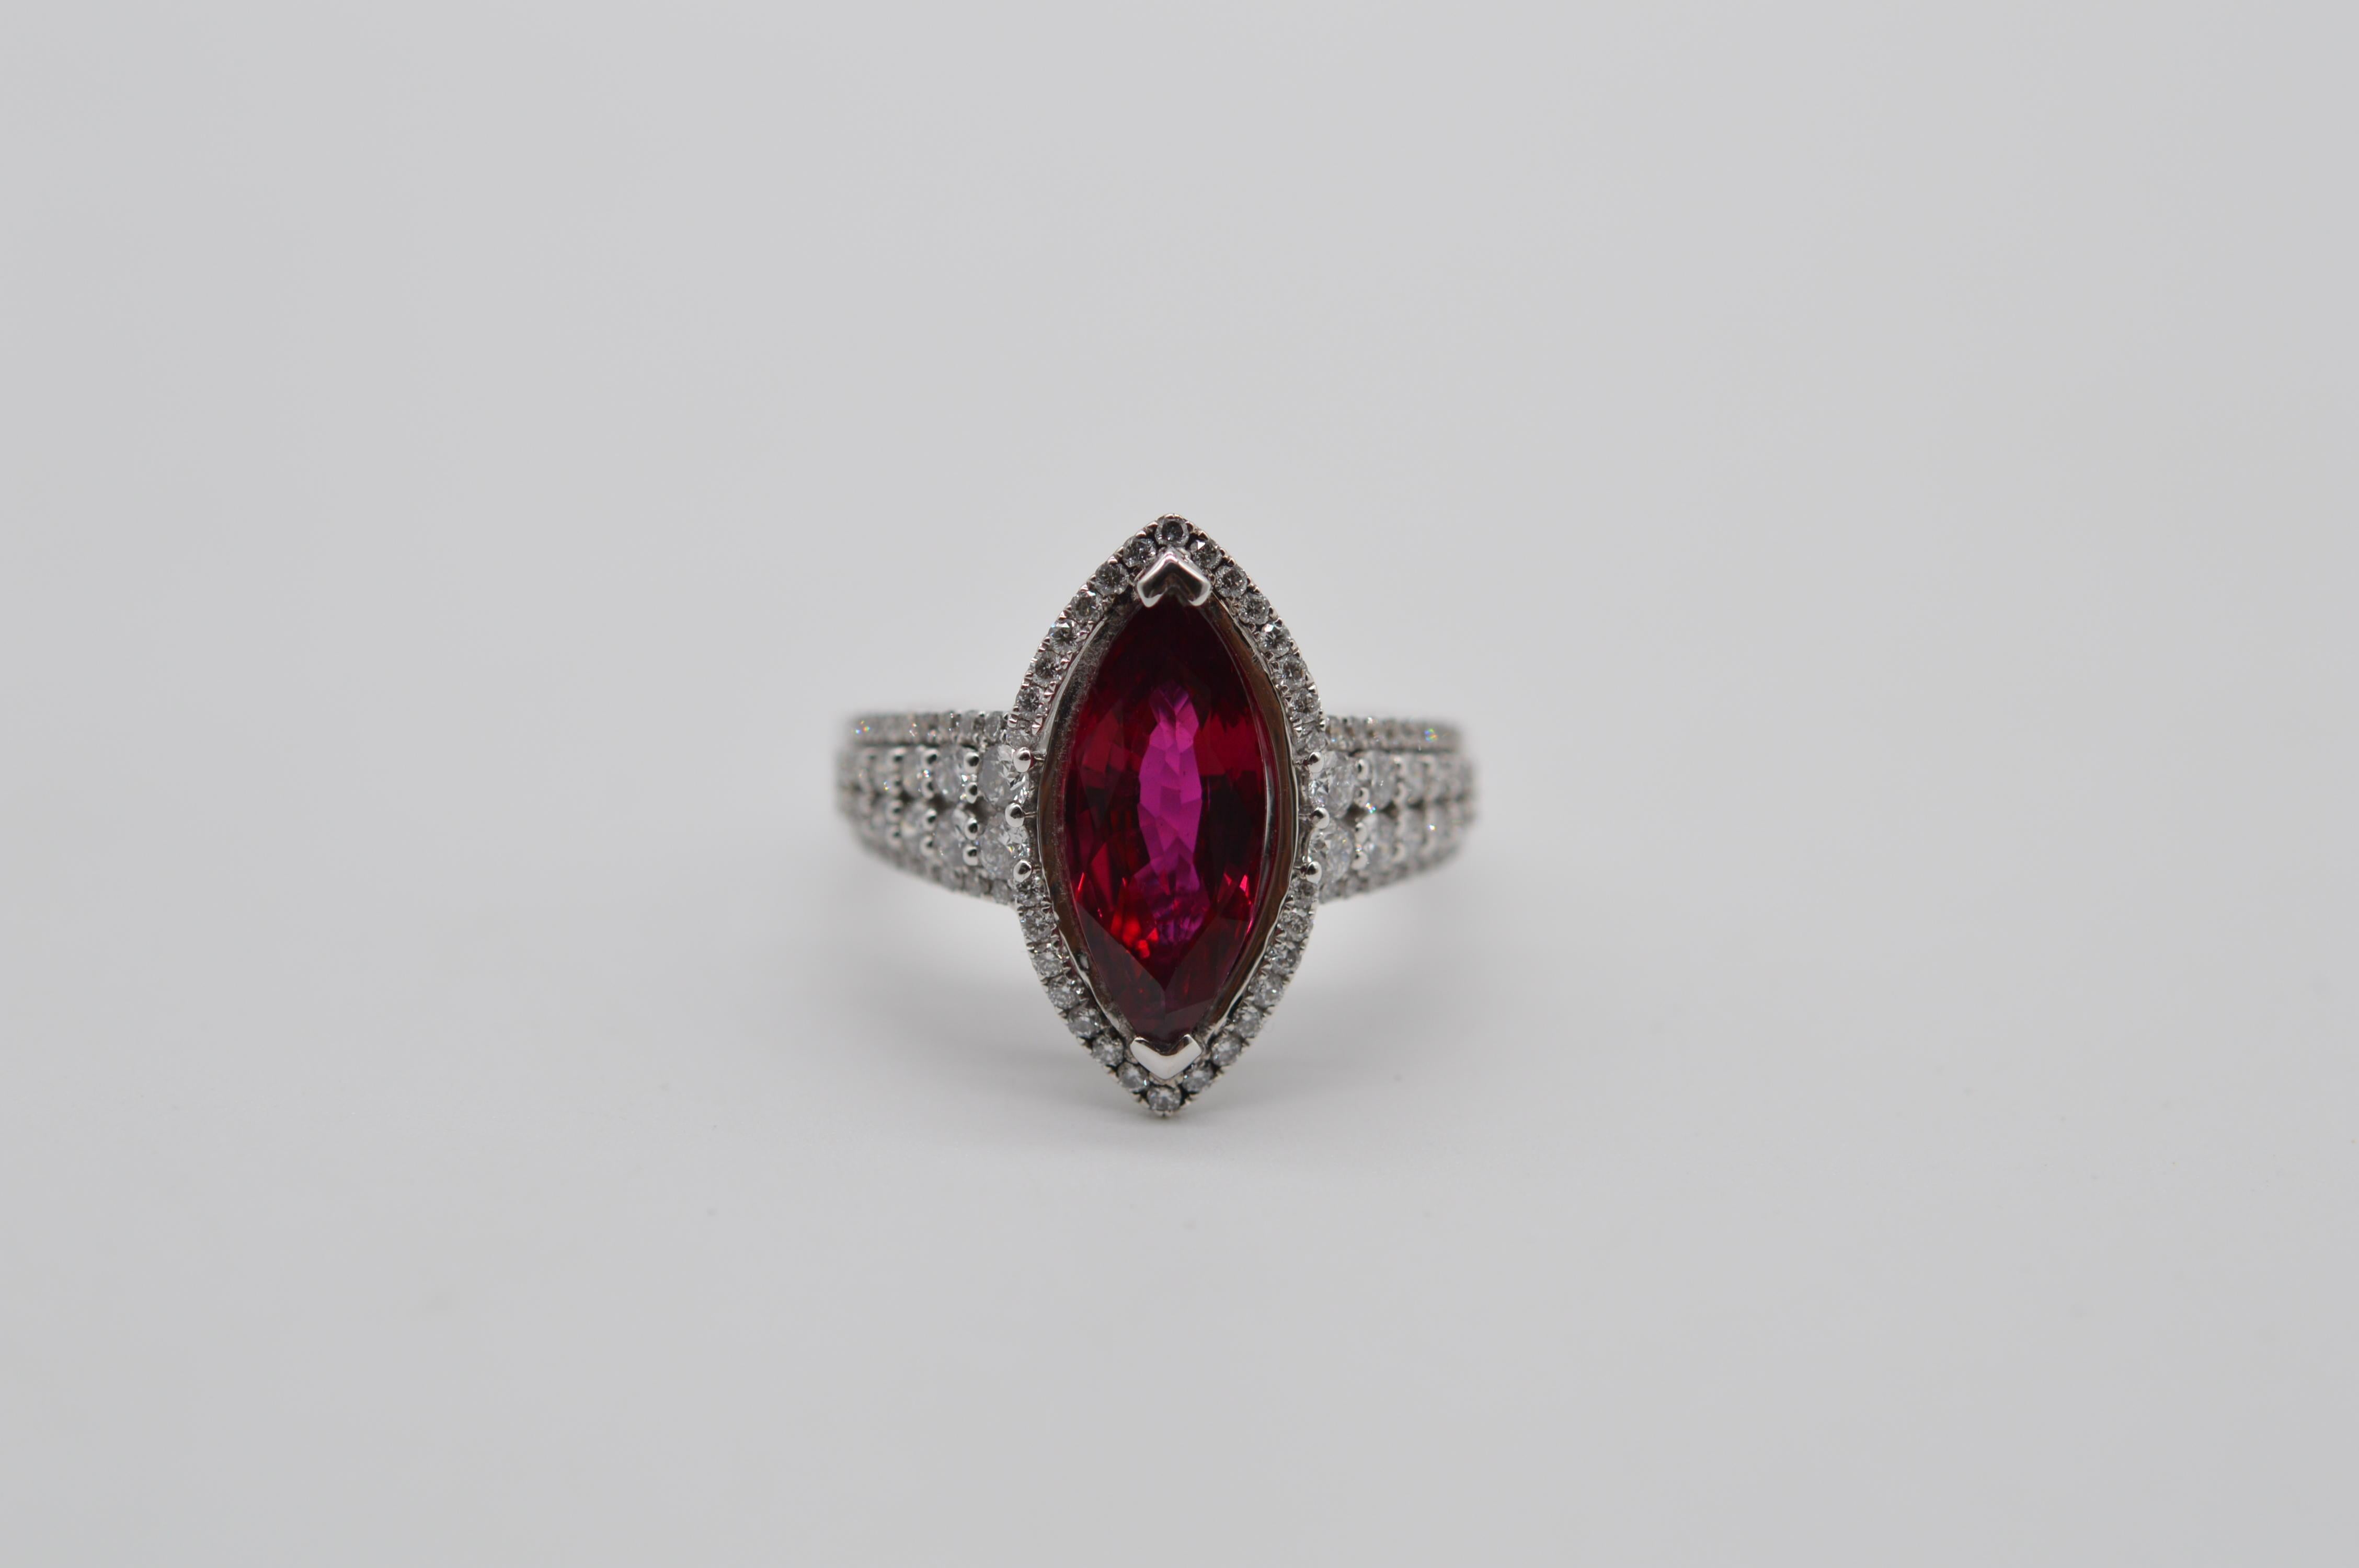 Intense Siam Marquise Ruby 2.95 carats ring unworn
Mounted in an 18K White Gold ring
The ring size is 53
The total weight of the ring is 6.4 grams
Set with 84 Round Diamonds for a total weight of 0.81 carats
This Ruby is accompanied by a gemstone